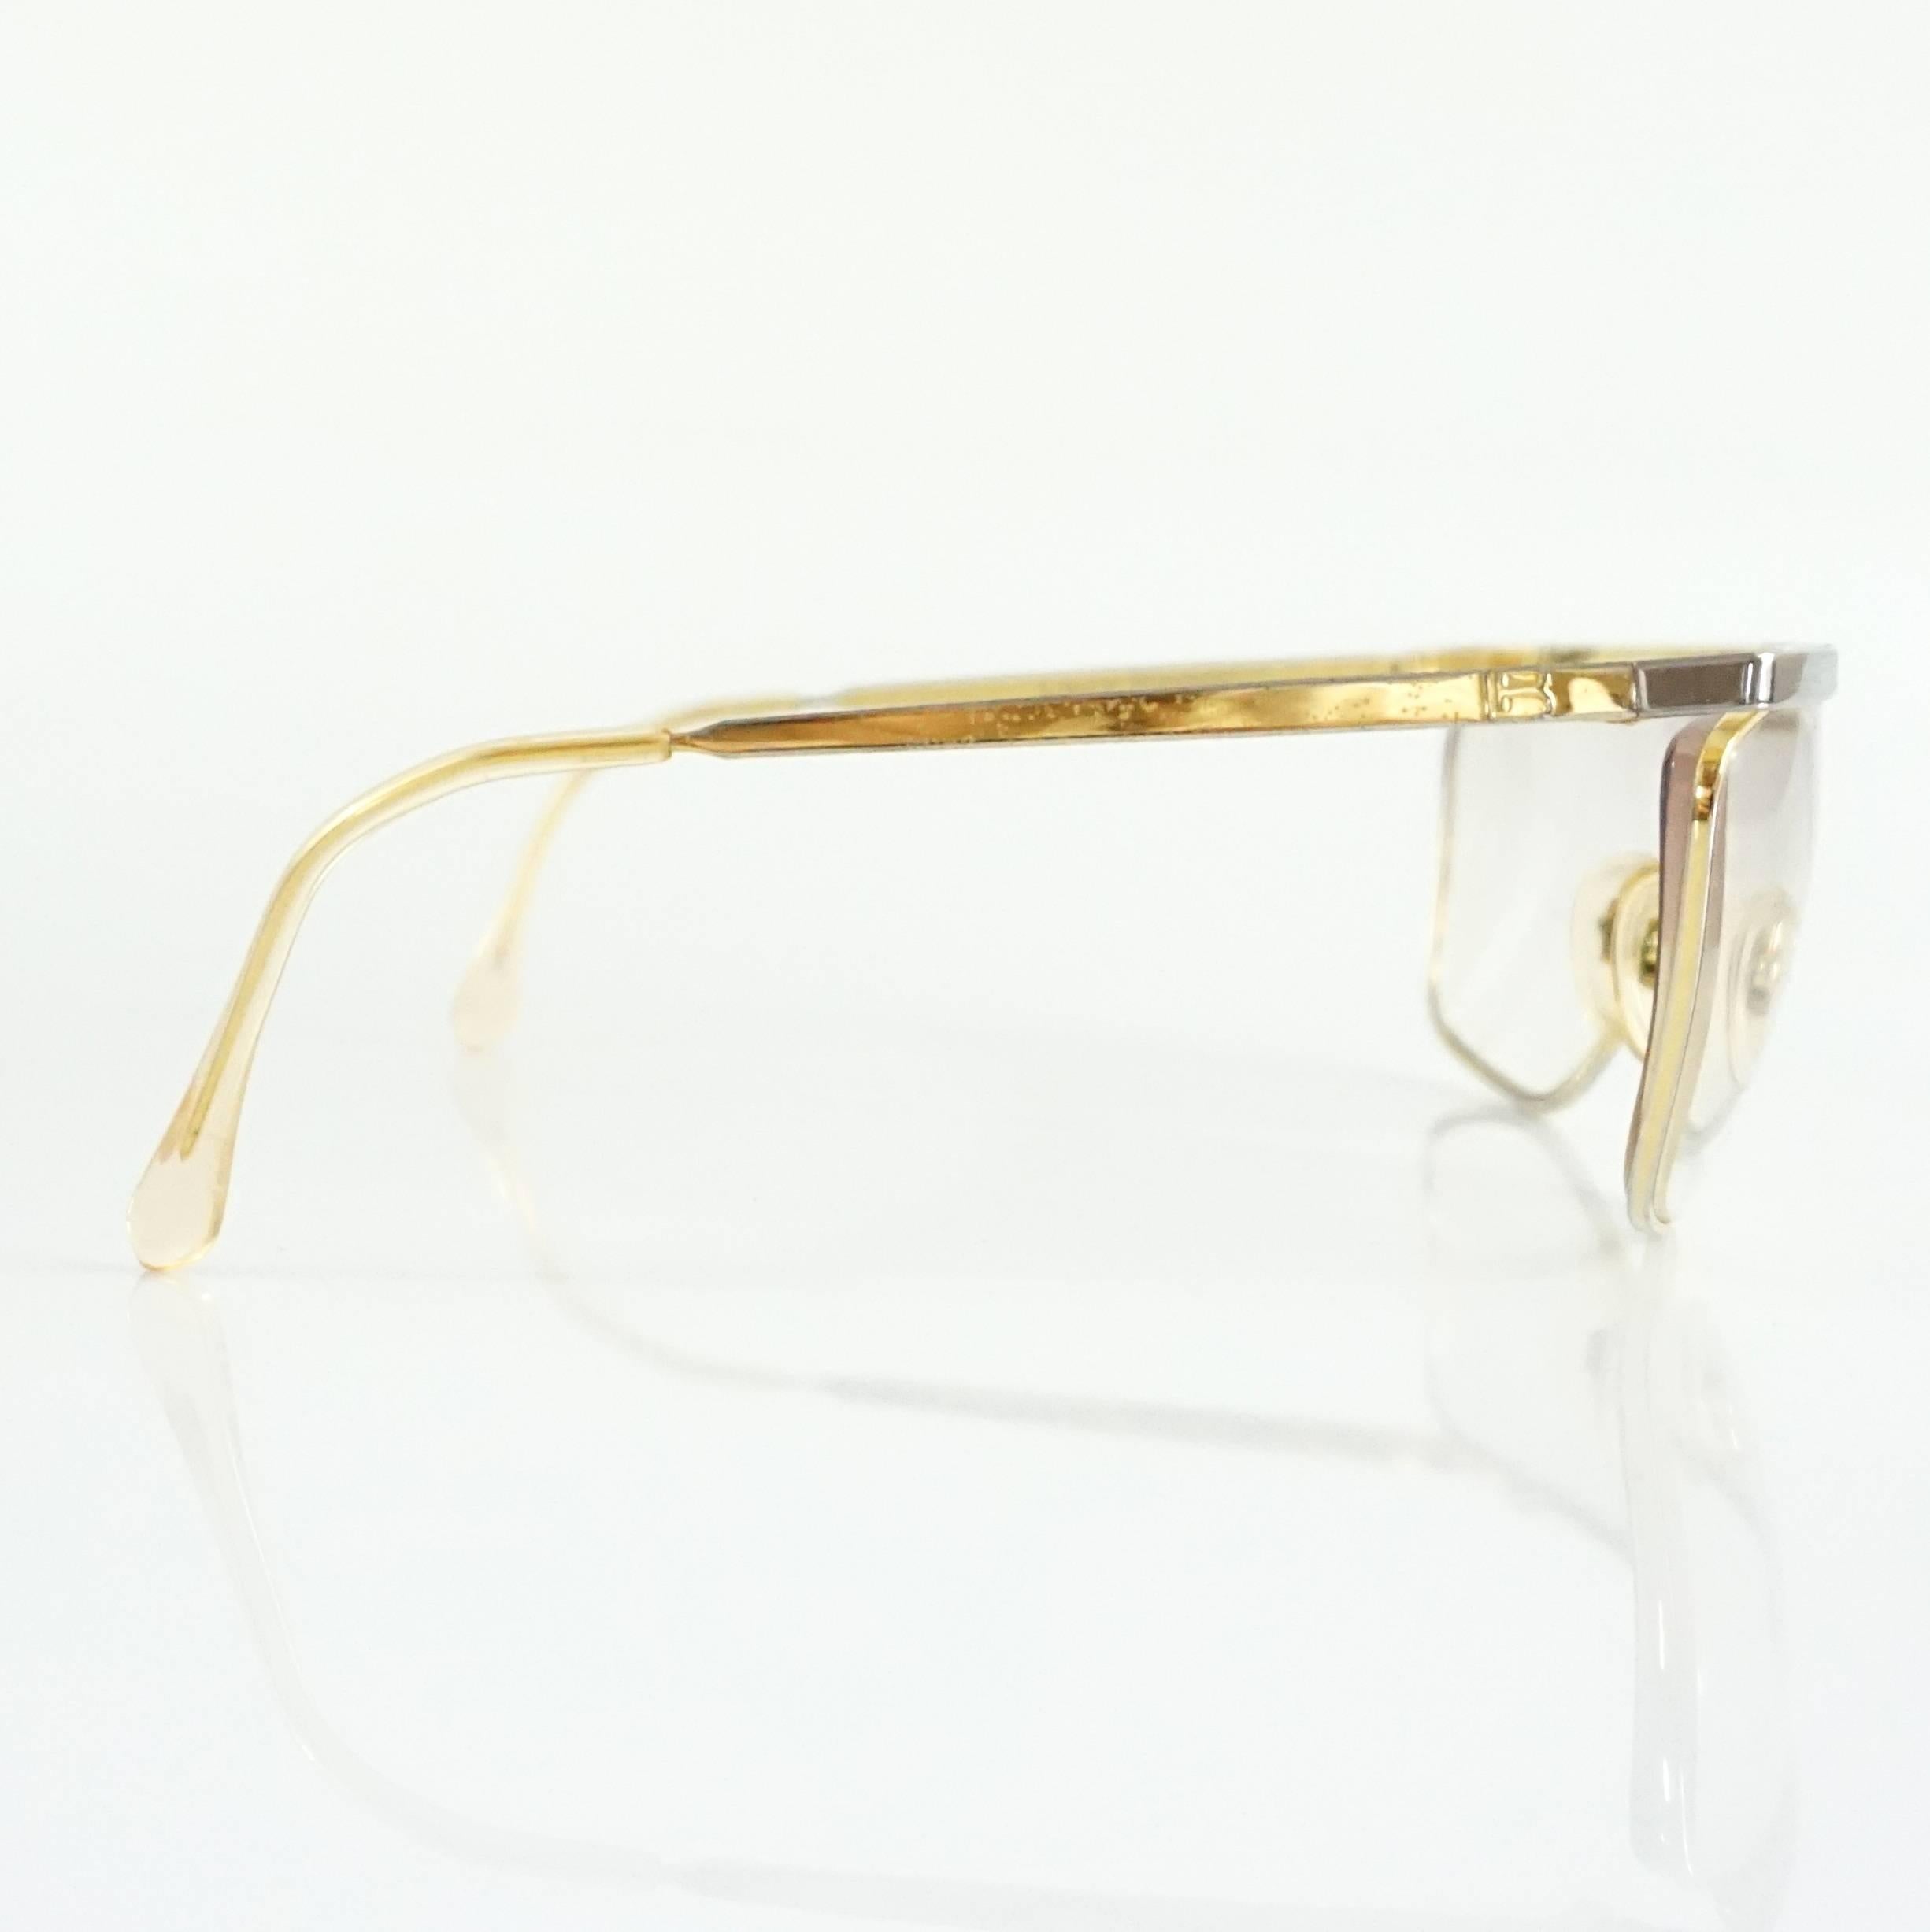 These Laura Biagiotti glasses are gold and silver. They are in fair condition and have overall wear.

Measurements
Length: 6.8"
Leg Length: 4.5"
Lens Length: 2.5"
Lens Height: 2"